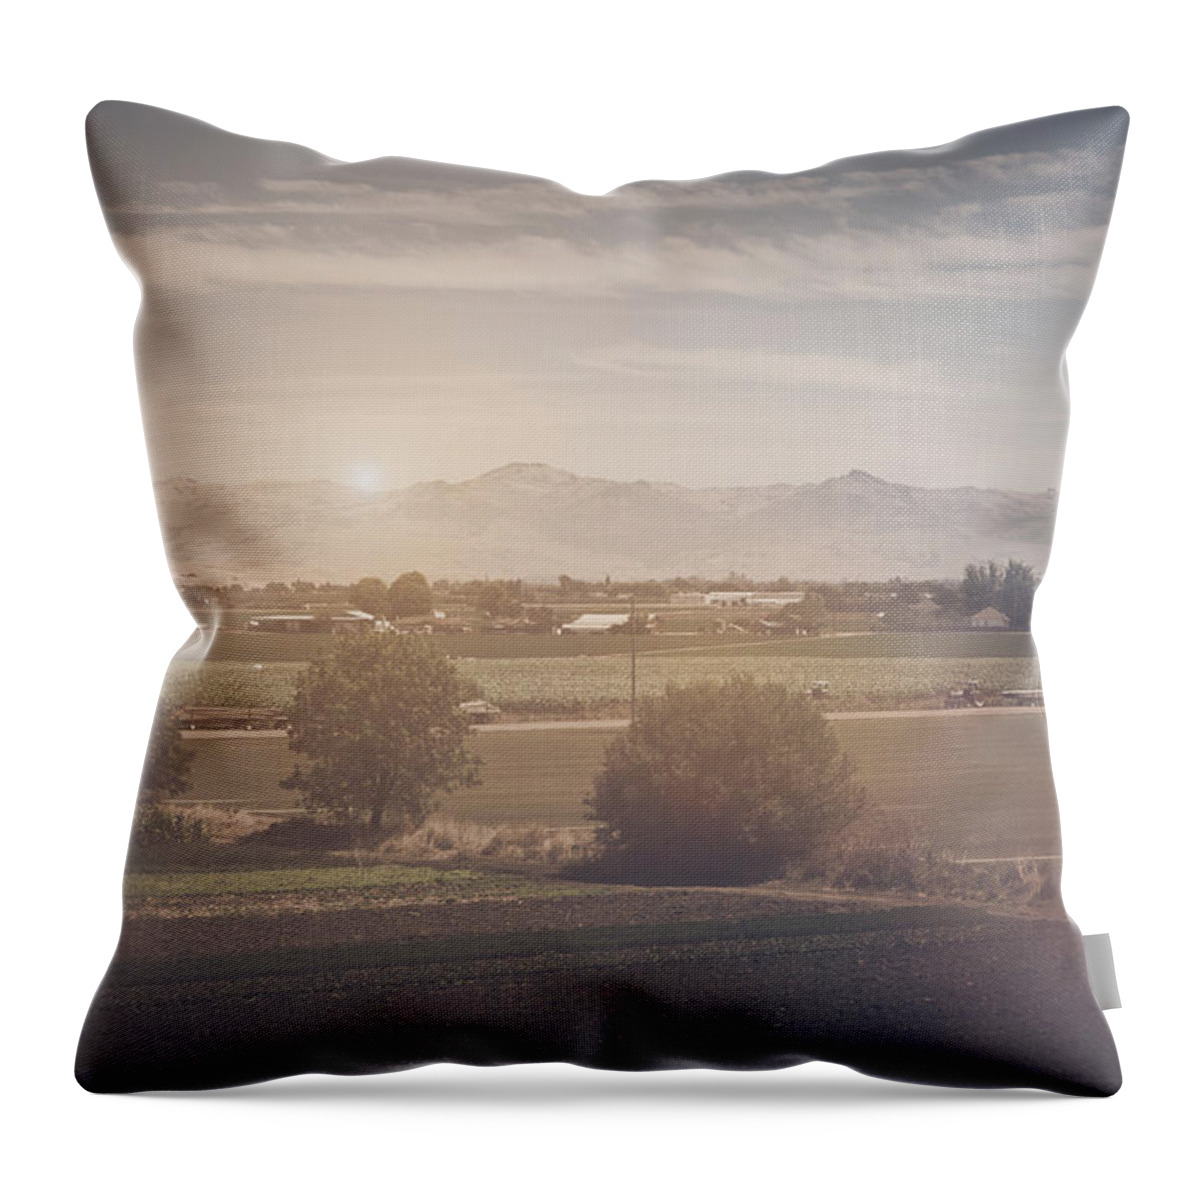 Green Throw Pillow featuring the photograph Agriculture Scene in Retro Instagram Style Filter by Brandon Bourdages